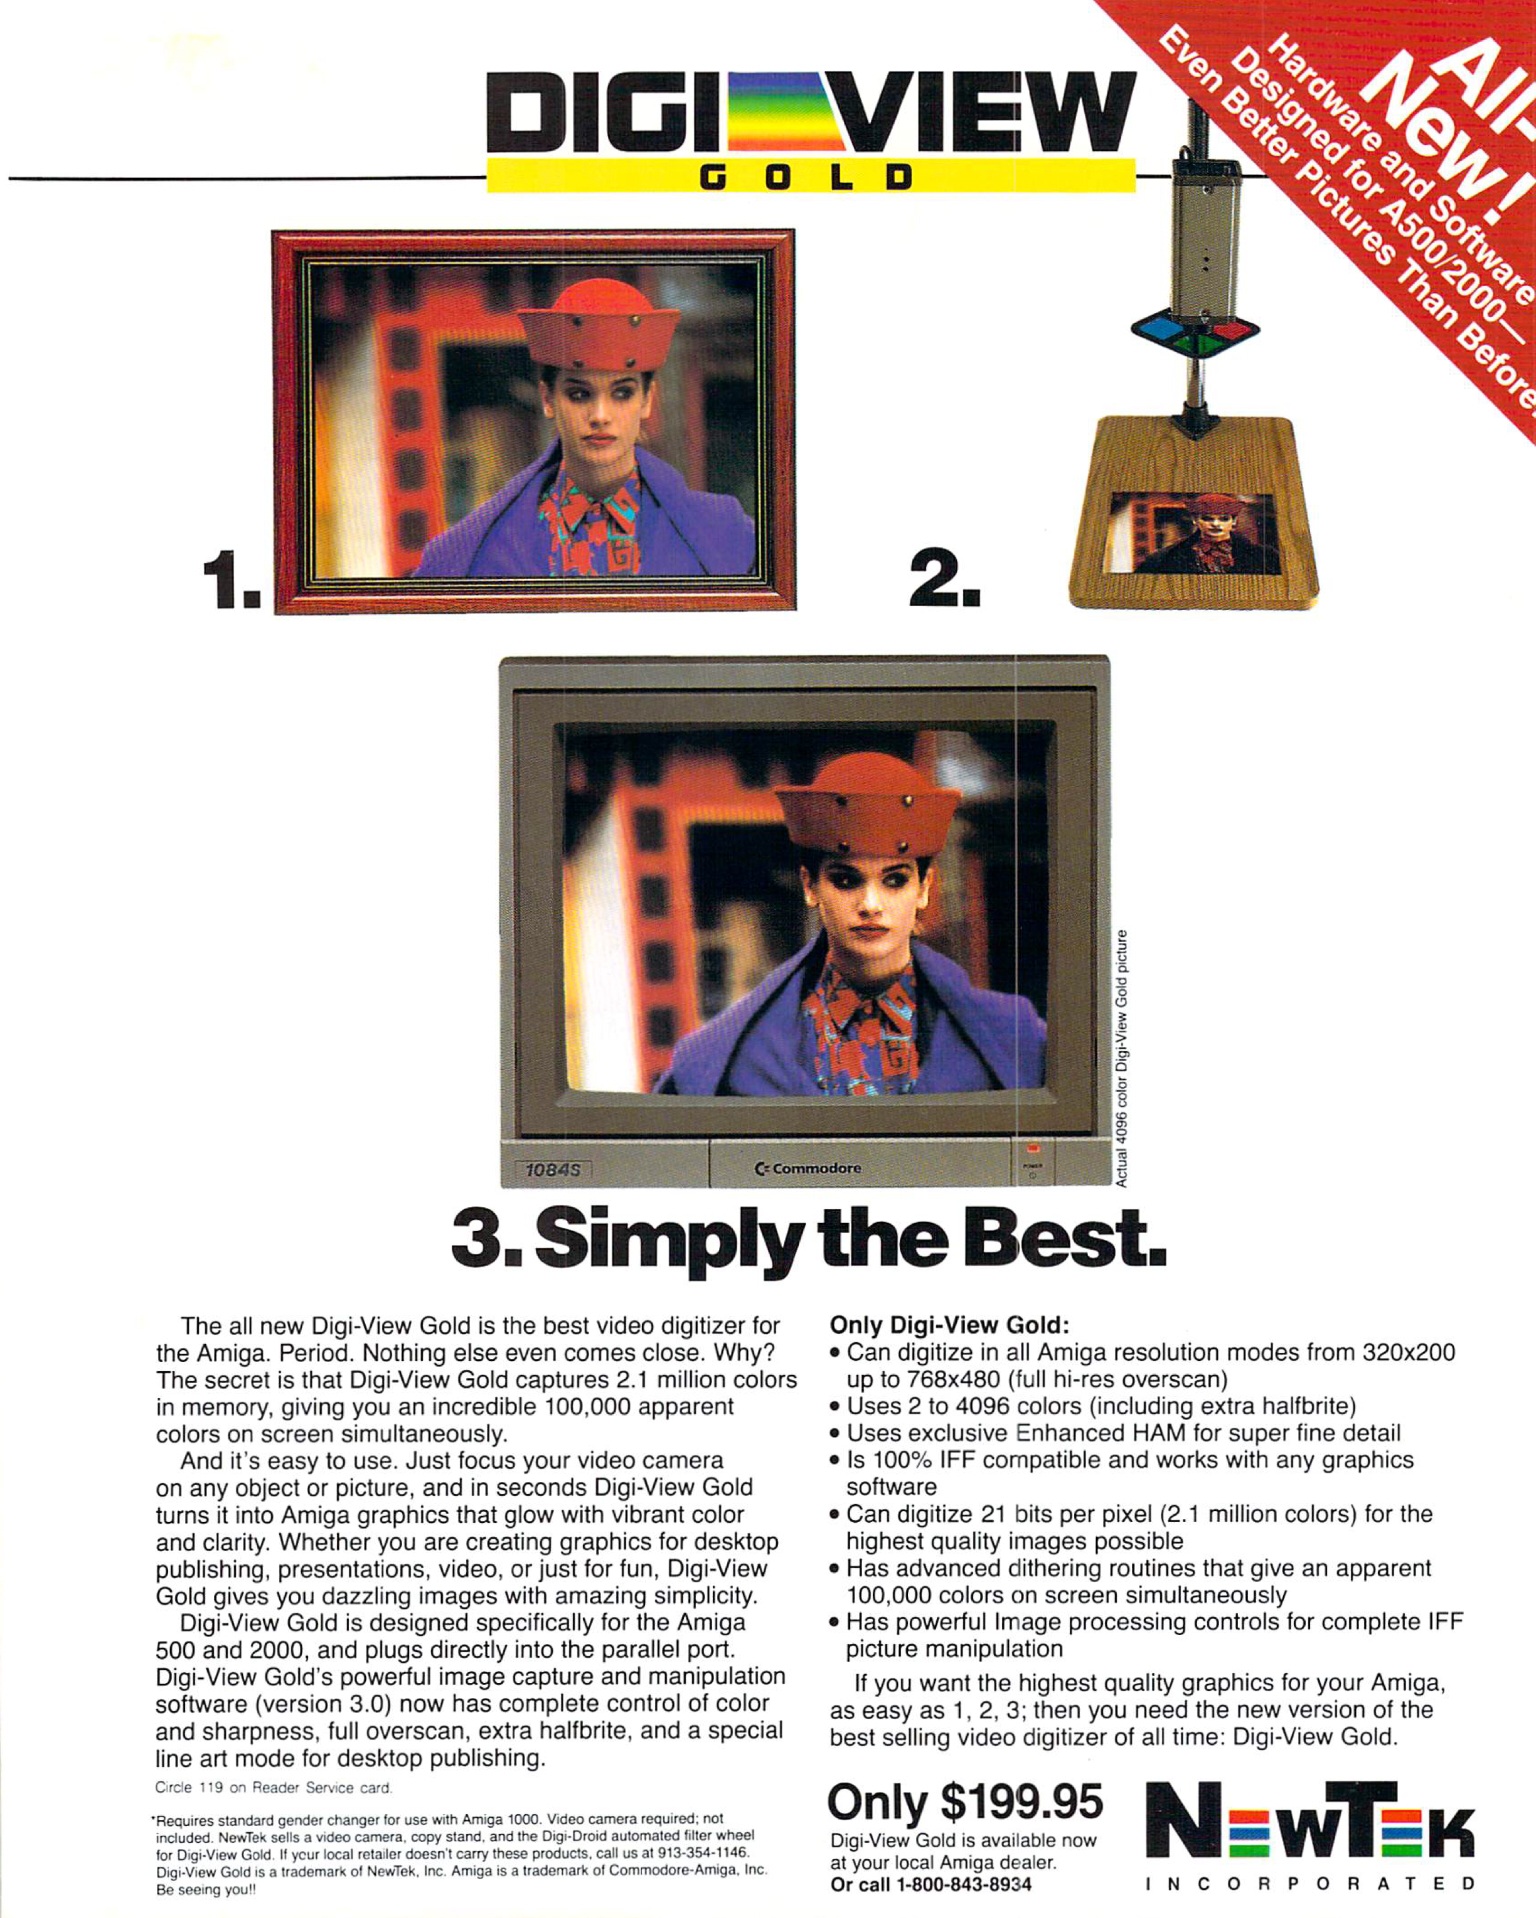 An ad for NewTek's Digi-View, as seen in the November 1989 issue of AmigaWorld magazine (AmigaWorld)